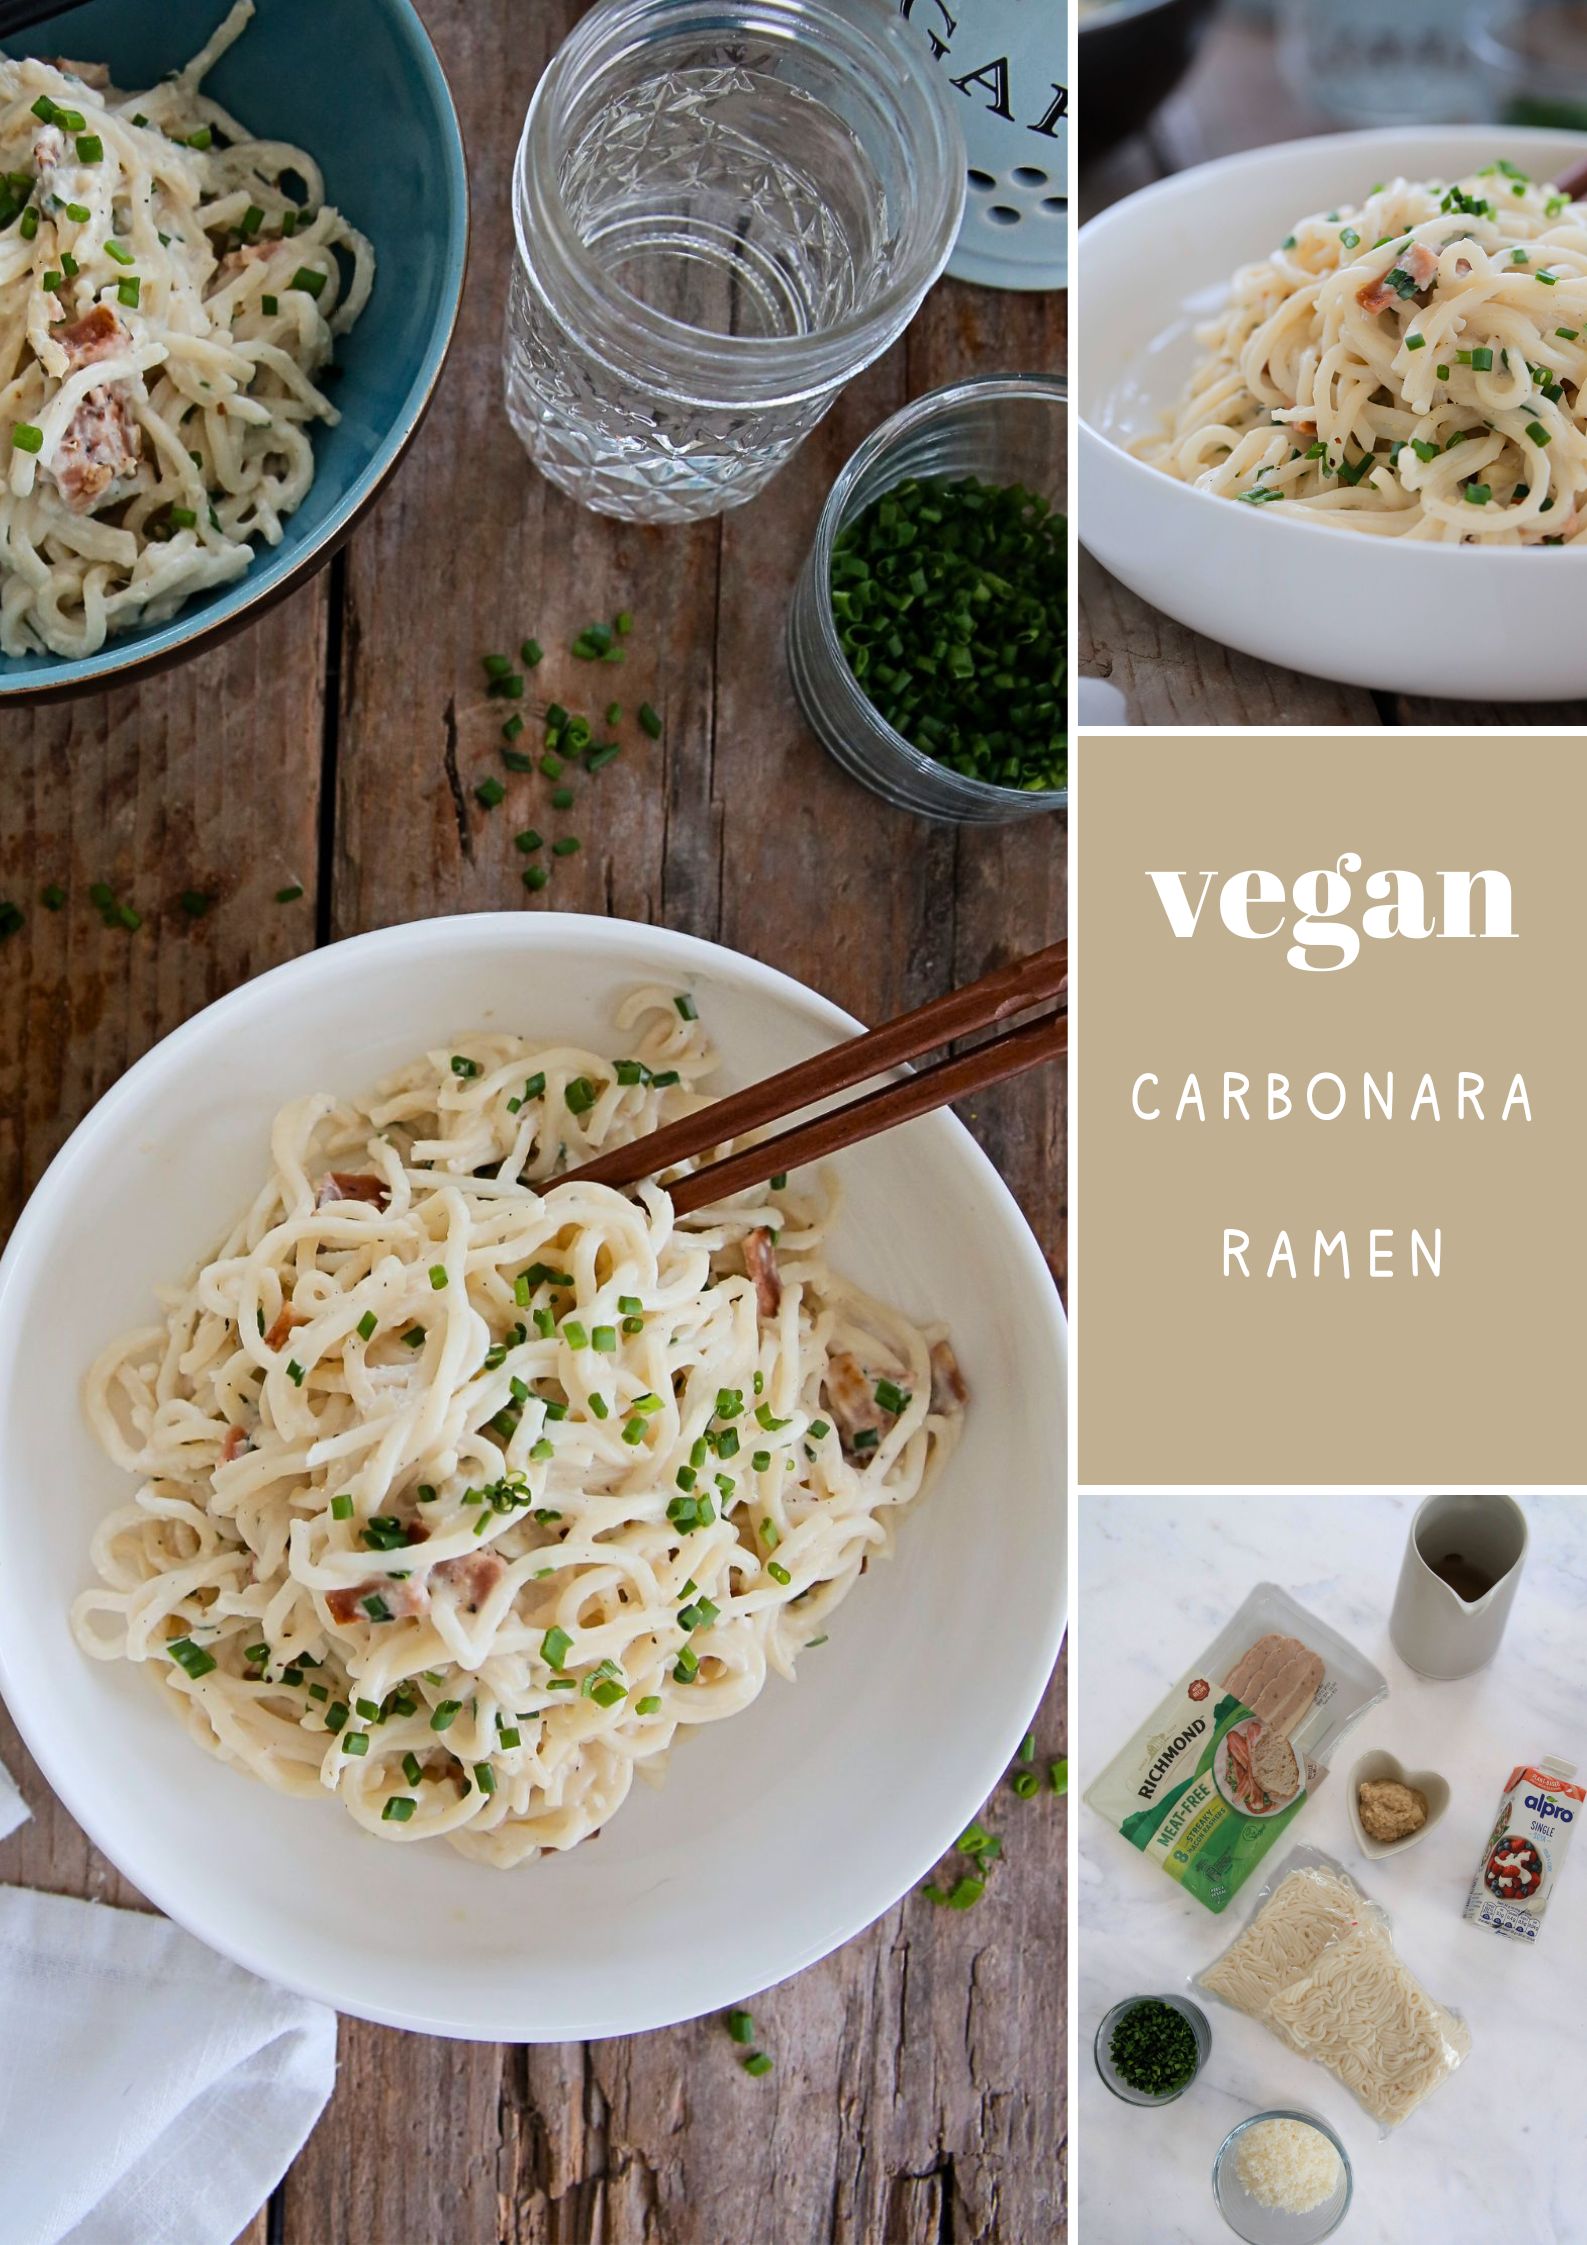 If you like simple, one pan meals with minimal ingredients but no compromise on flavour you'll love this vegan carbonara ramen! Using ramen noodles means it can all be cooked in one pan in around 20 minutes. It's perfect nourishing food after a busy day but tastes special enough for date night! Recipe on thecookandhim.com #carbonara #carbonararamen #fusionfood #veganpasta #onepanmeal #onepandinner